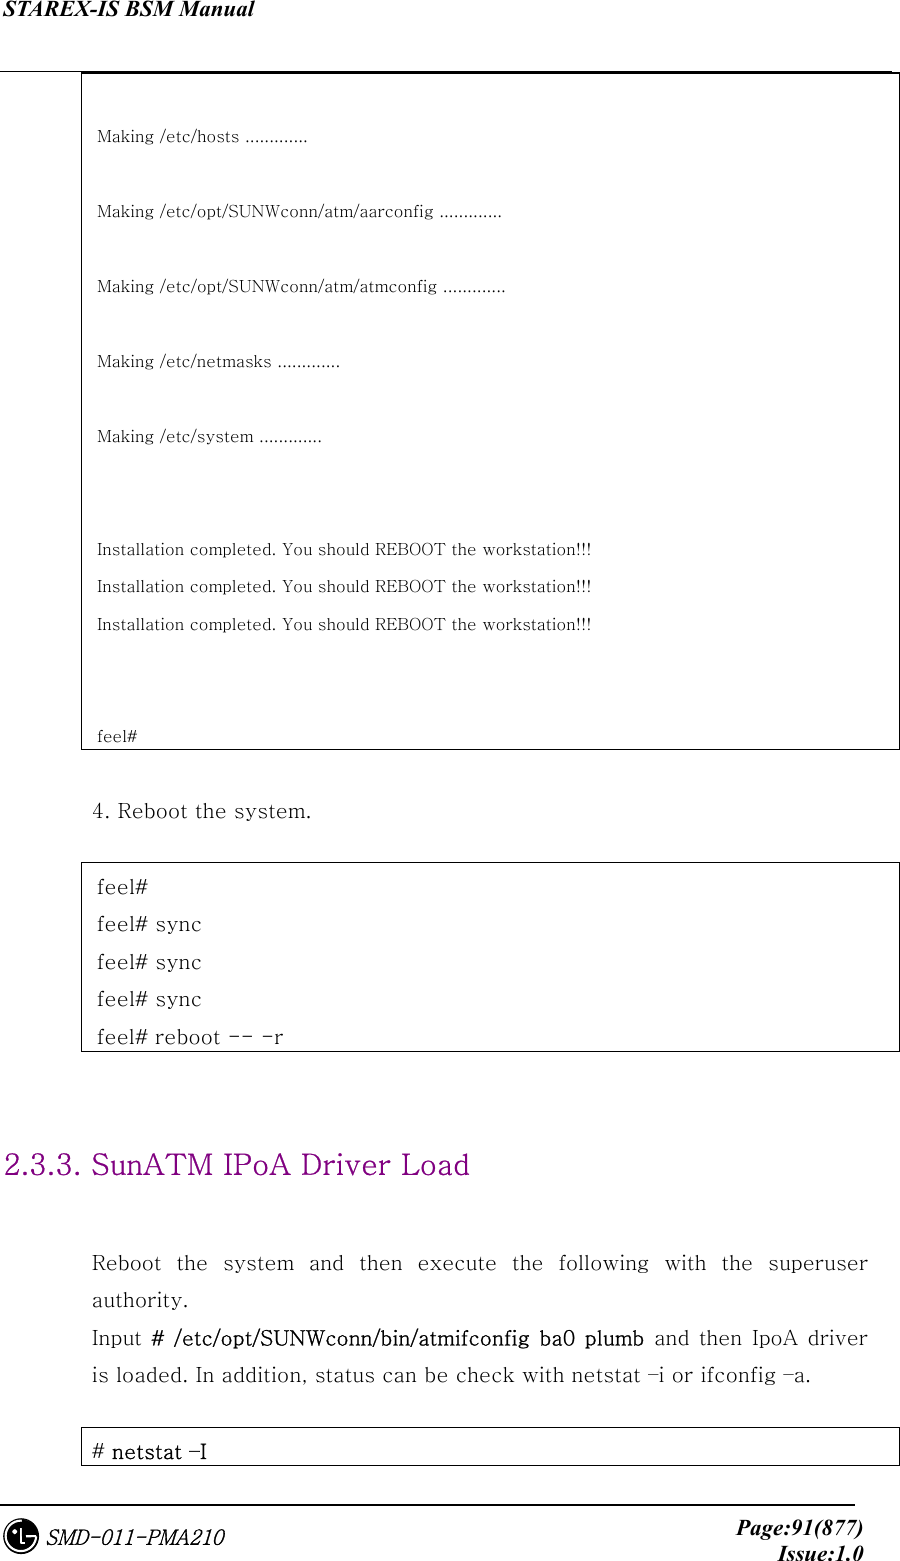 STAREX-IS BSM Manual     Page:91(877)Issue:1.0SMD-011-PMA210  Making /etc/hosts .............  Making /etc/opt/SUNWconn/atm/aarconfig .............  Making /etc/opt/SUNWconn/atm/atmconfig .............  Making /etc/netmasks .............  Making /etc/system .............   Installation completed. You should REBOOT the workstation!!! Installation completed. You should REBOOT the workstation!!! Installation completed. You should REBOOT the workstation!!!   feel#  4. Reboot the system.    feel#   feel# sync feel# sync feel# sync feel# reboot -- -r   2.3.3. SunATM IPoA Driver Load  Reboot the system and then execute the following with the superuser authority.   Input # /etc/opt/SUNWconn/bin/atmifconfig ba0 plumb and  then IpoA  driver is loaded. In addition, status can be check with netstat –i or ifconfig –a.  # netstat –I 